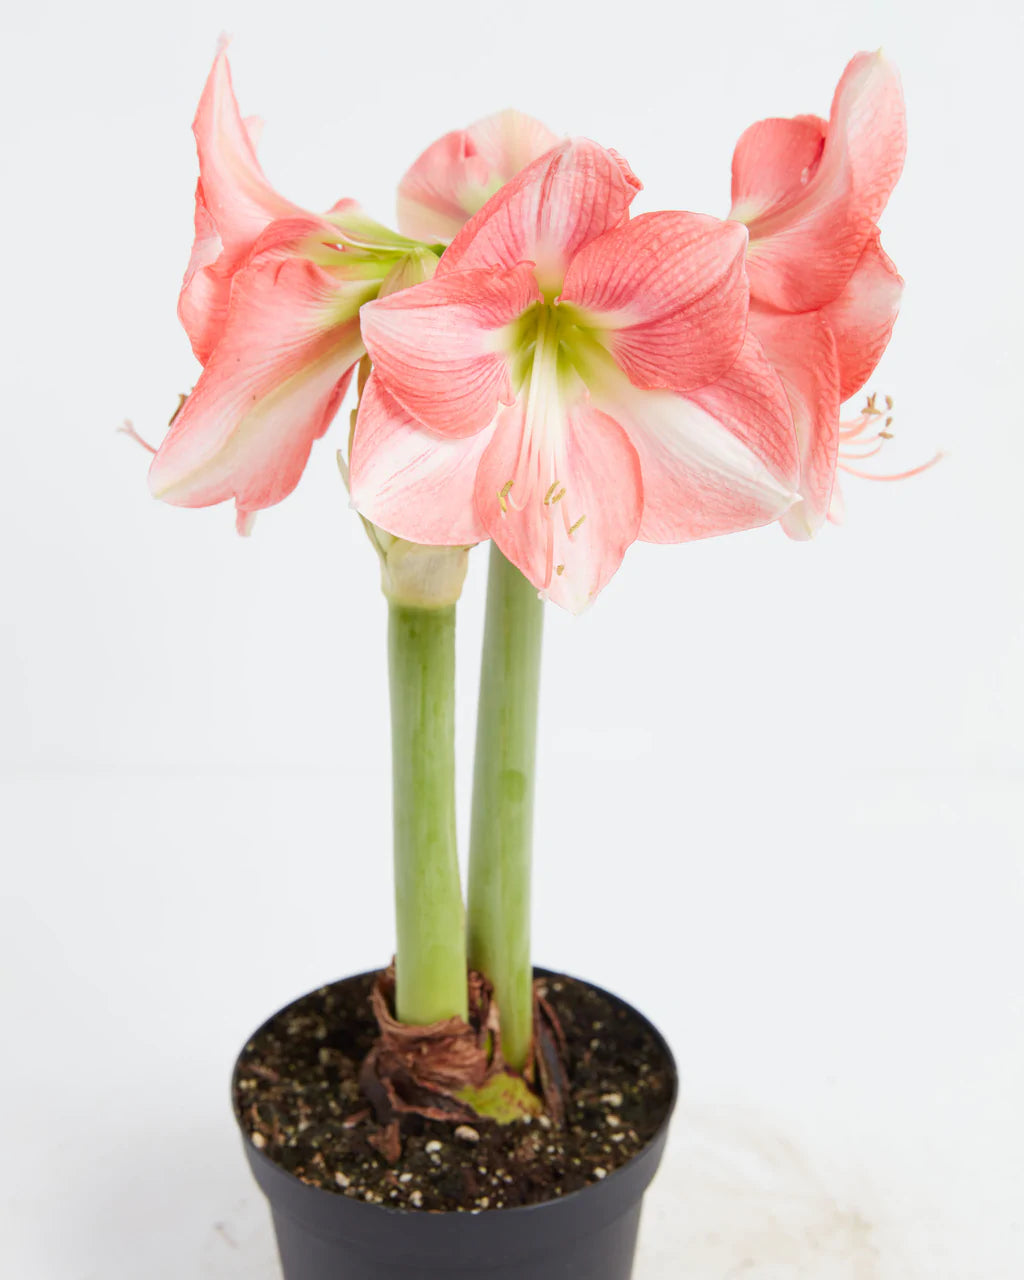 Planting Amaryllis Bulbs Indoors and in the Garden